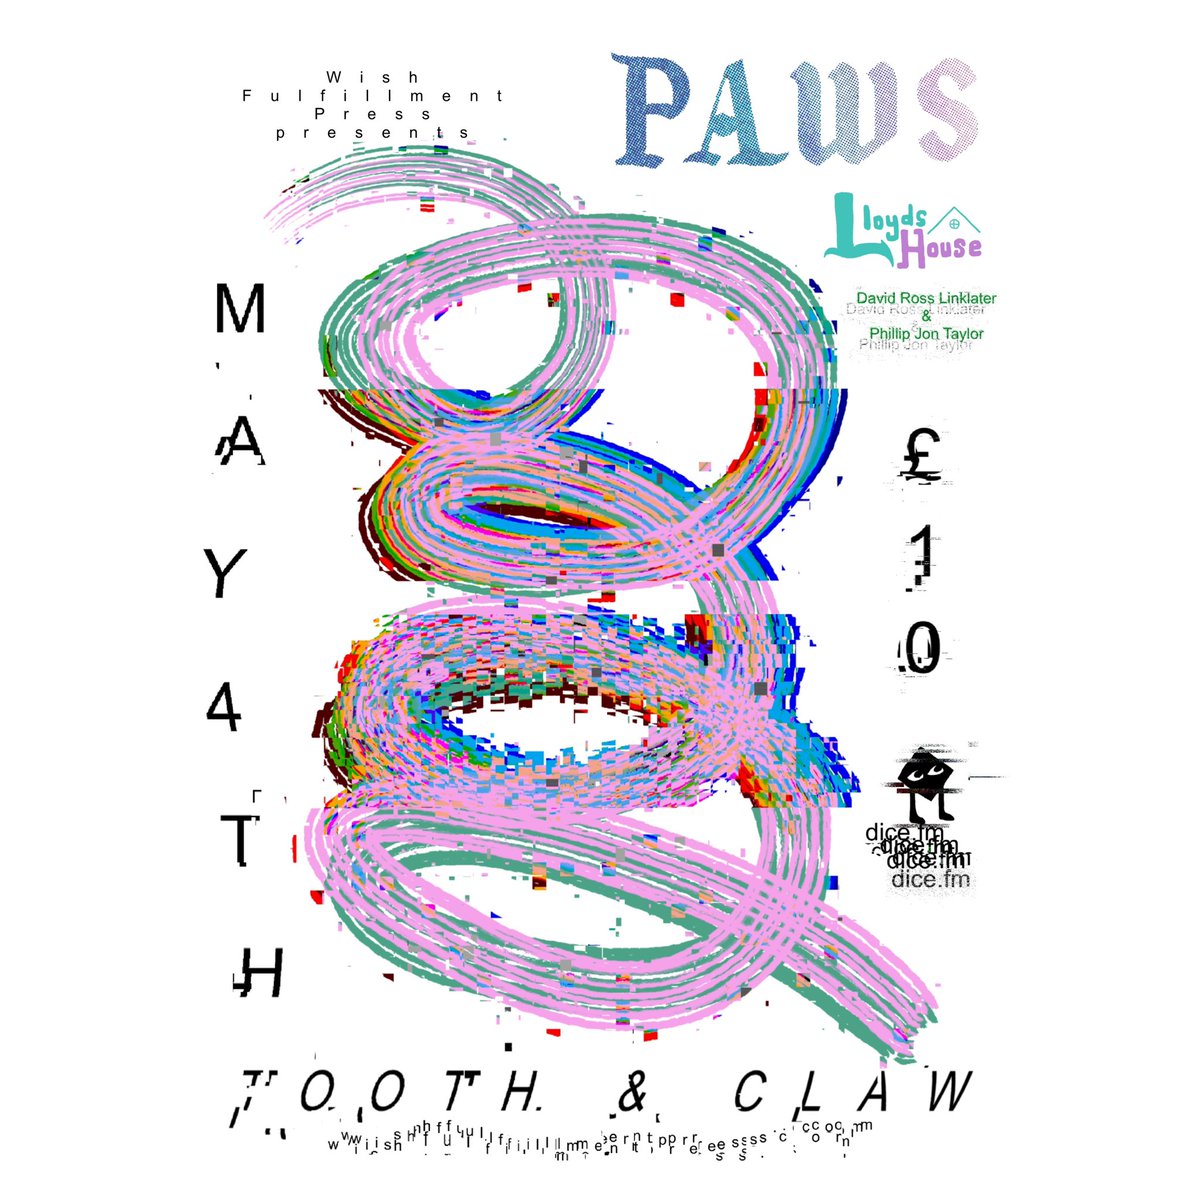 Hello Inverness and greater Highland area. We are putting on this show extravaganza. Saturday May 4th at @thetoothandclaw. PAWS + @lloyds_house + @DavidRossLinkla/@pipjontaylor! You’d be v silly to miss this one! Tickets on sale now: link.dice.fm/ke621ea498d7?d…